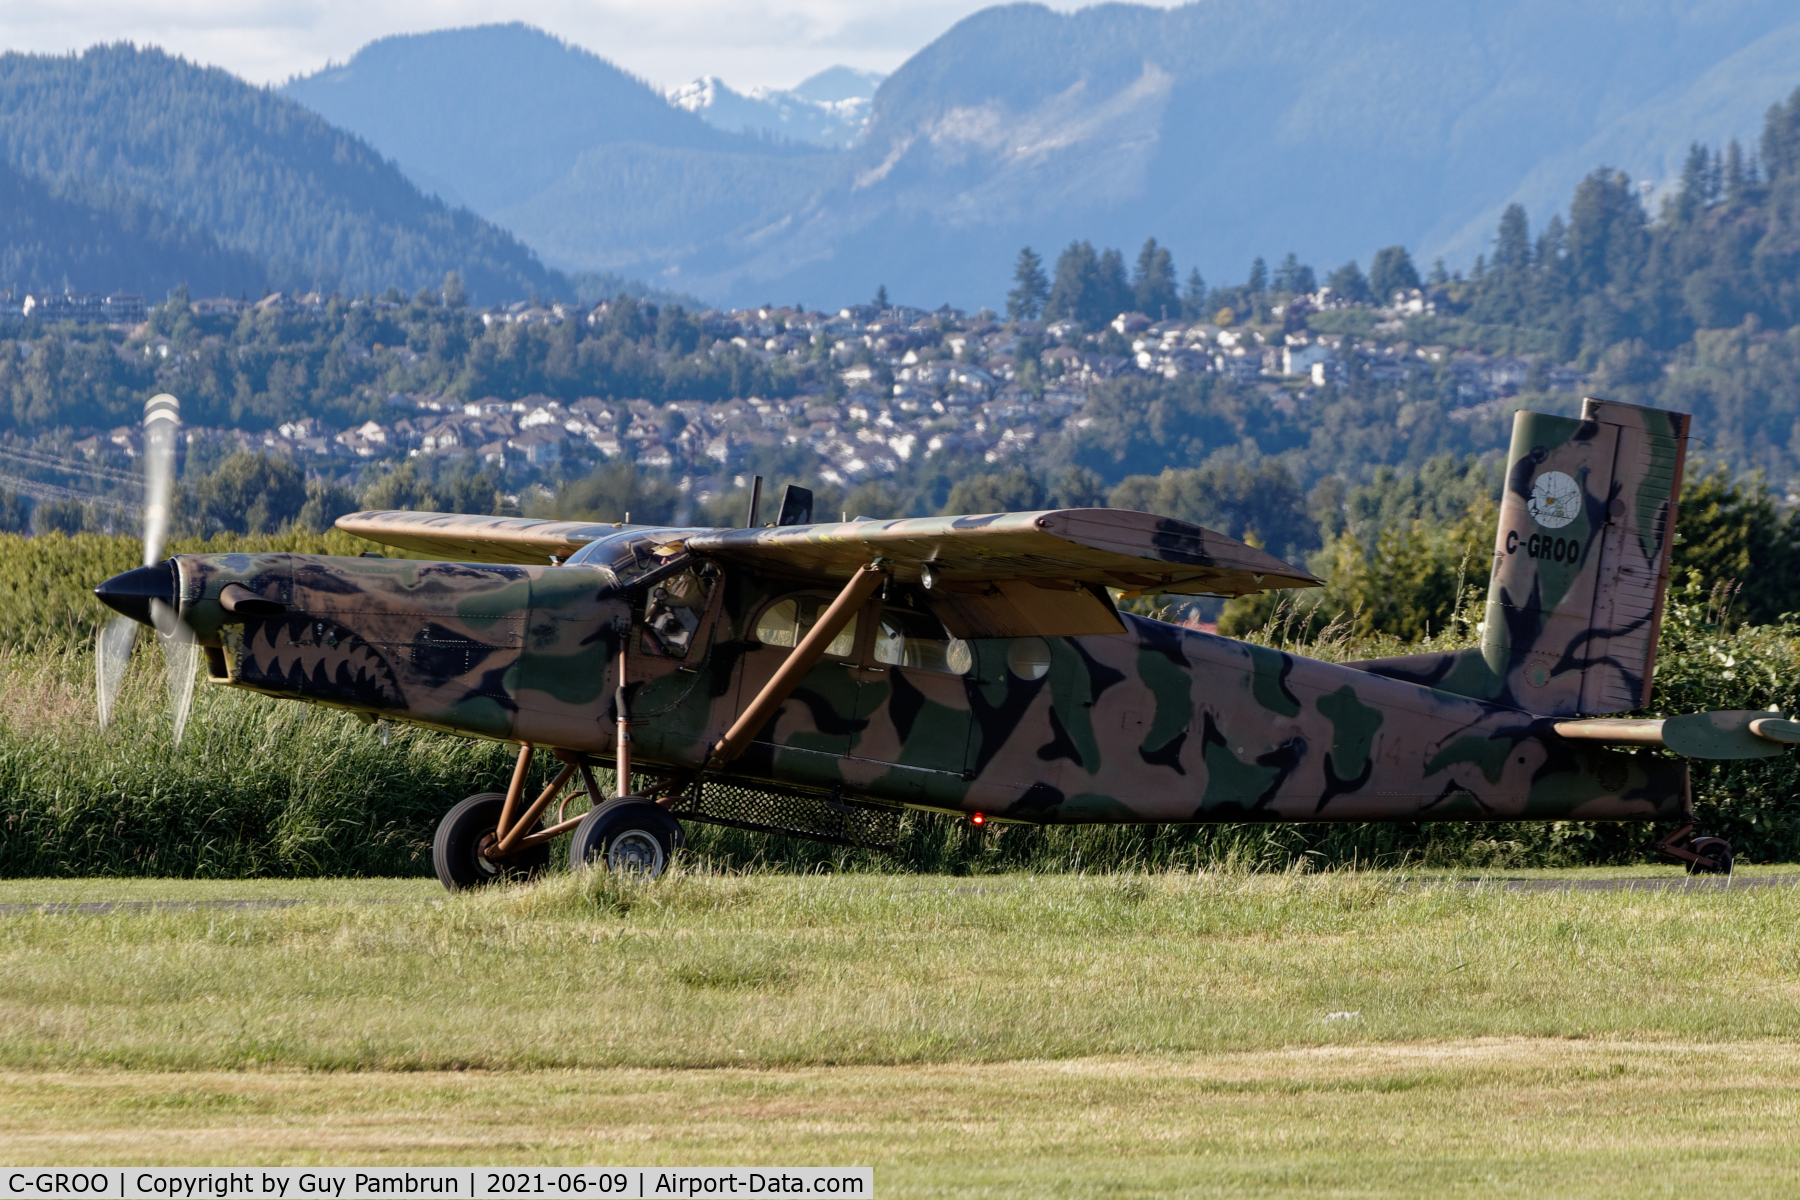 C-GROO, 1967 Pilatus PC-6/B1-H2 Turbo Porter C/N 662, Just landed at Skydive Vancouver airfield in Abbotsford, B.C.